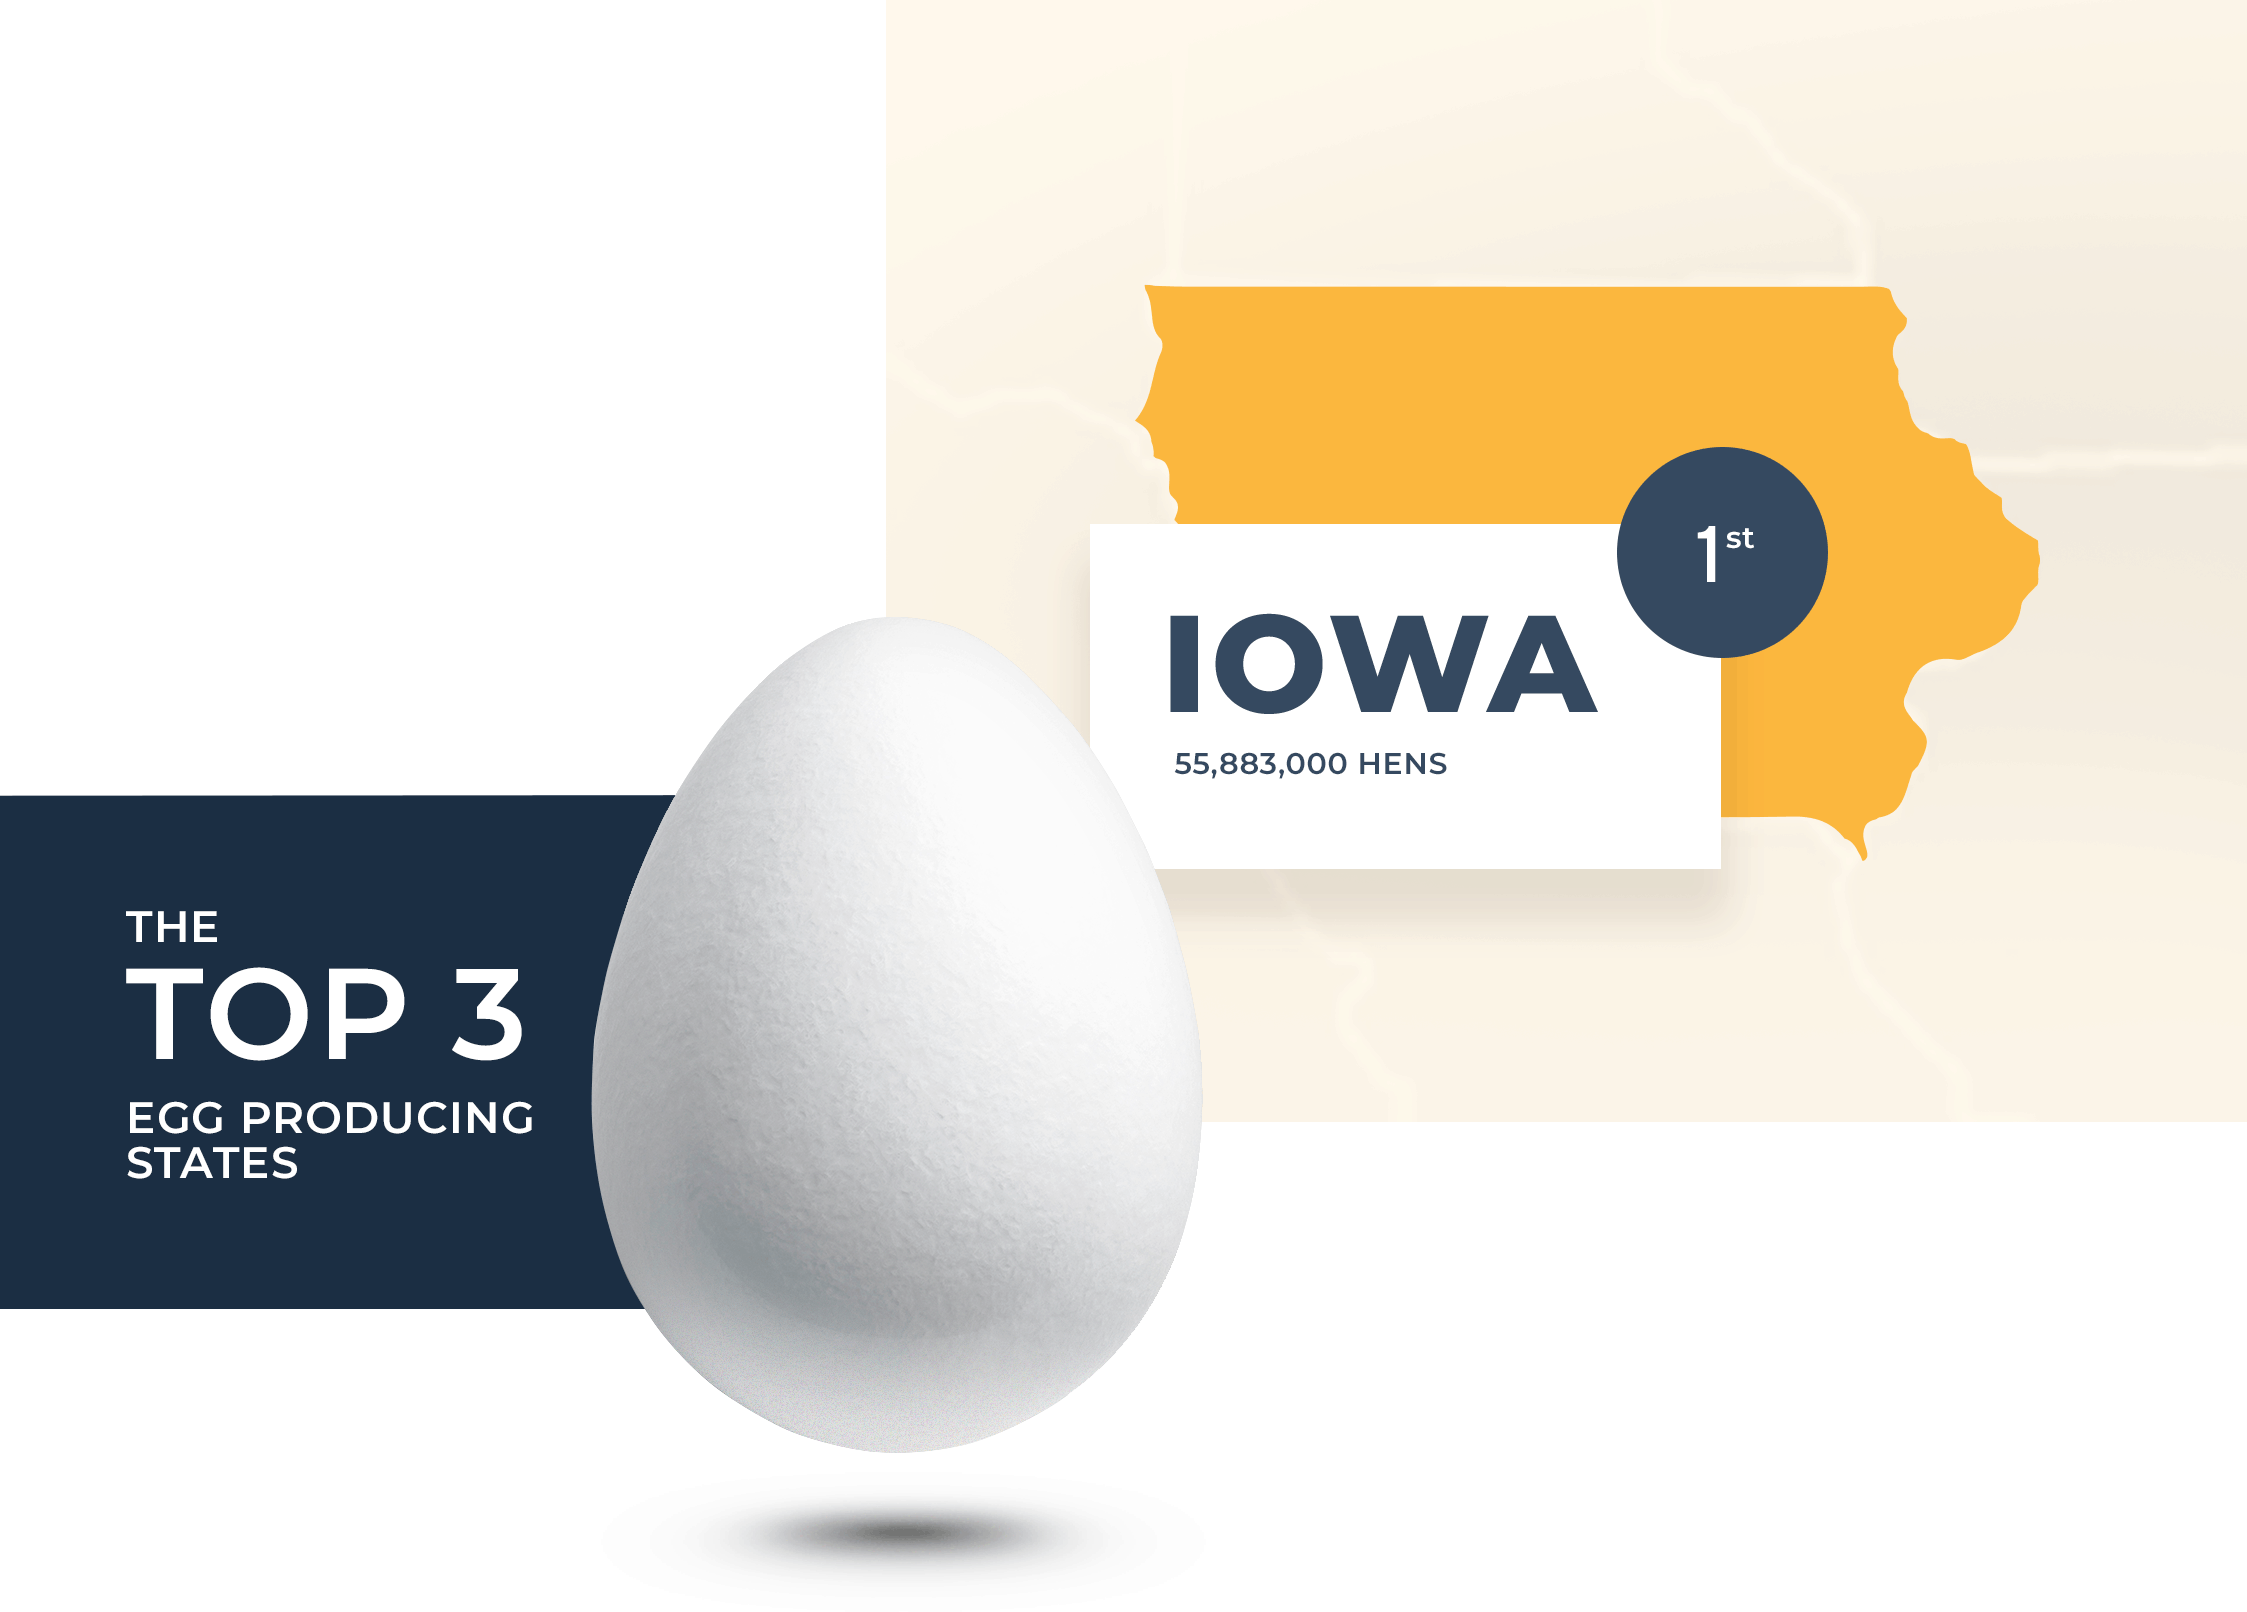 The Top 3 Egg Producing States: Iowa, 1st, 55,883,000 hens